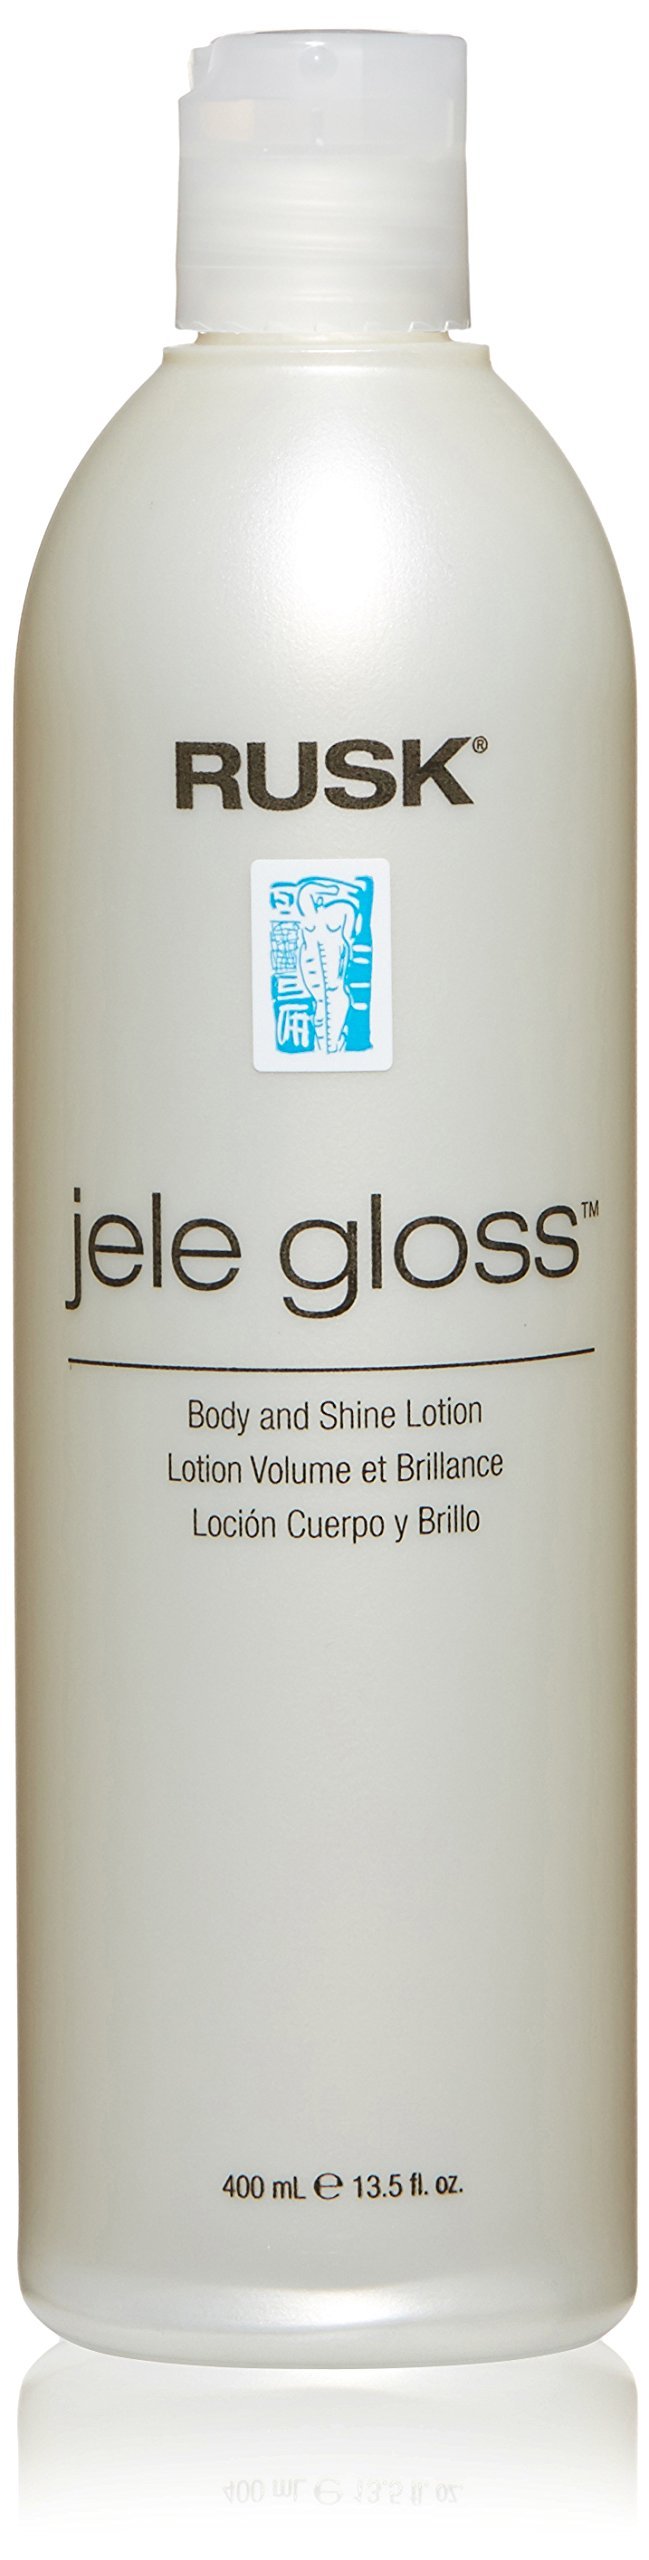 RUSK Designer Collection Jele Gloss Body and Shine Lotion, 13.5 Oz, Light-Hold Styling Lotion that Refines, Shines, and Gives Body to Hair, Adds Hold, Control, and Sheen - BeesActive Australia